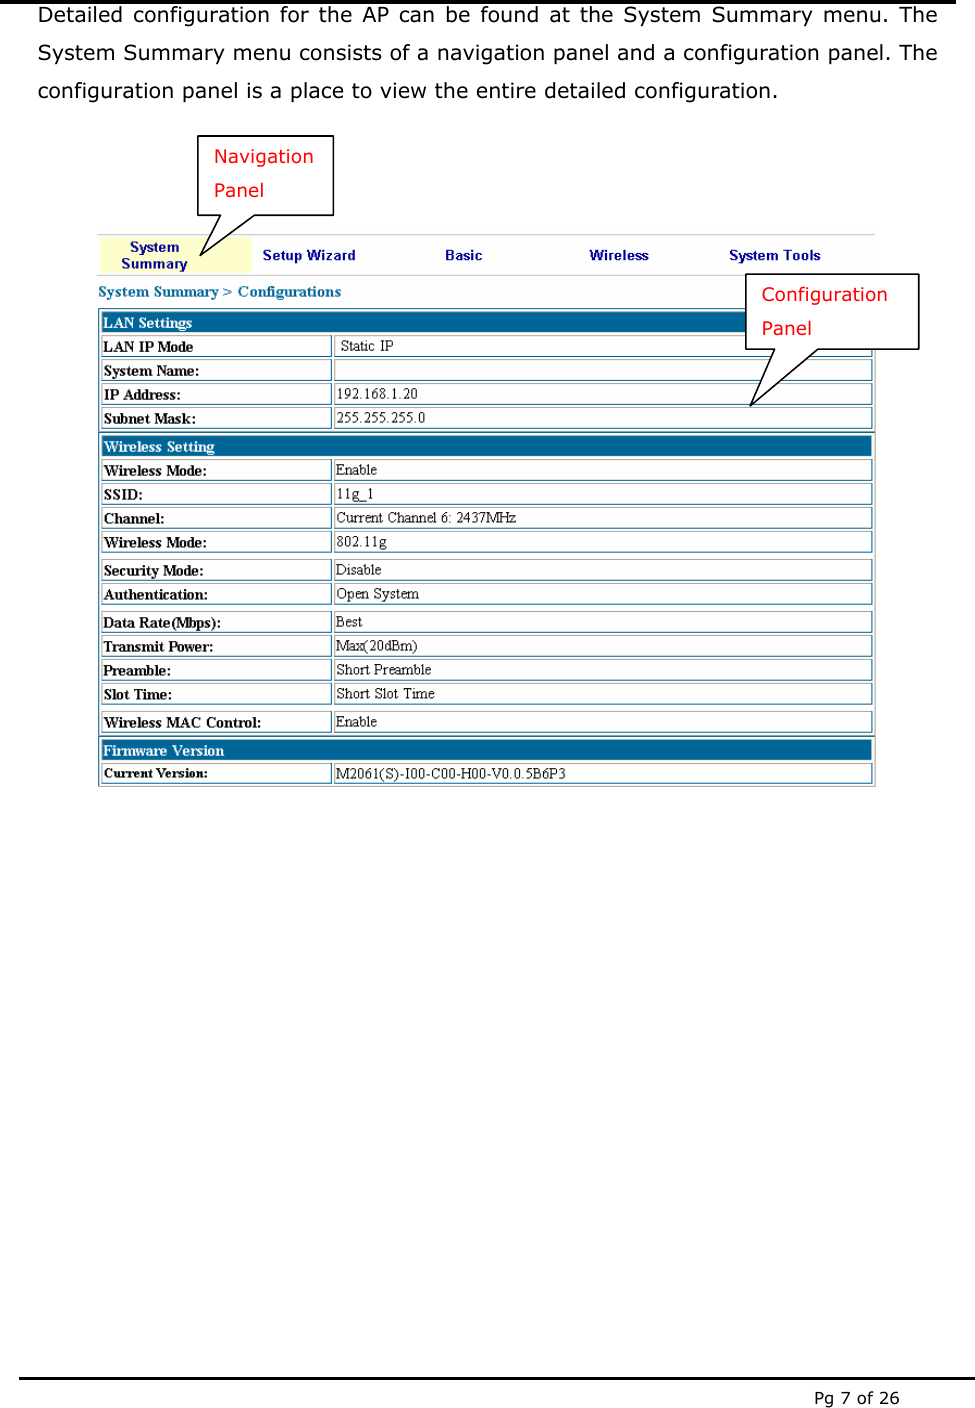  Pg 7 of 26 Detailed configuration for the AP can be found at the System Summary menu. The System Summary menu consists of a navigation panel and a configuration panel. The configuration panel is a place to view the entire detailed configuration.      Navigation Panel Configuration Panel 